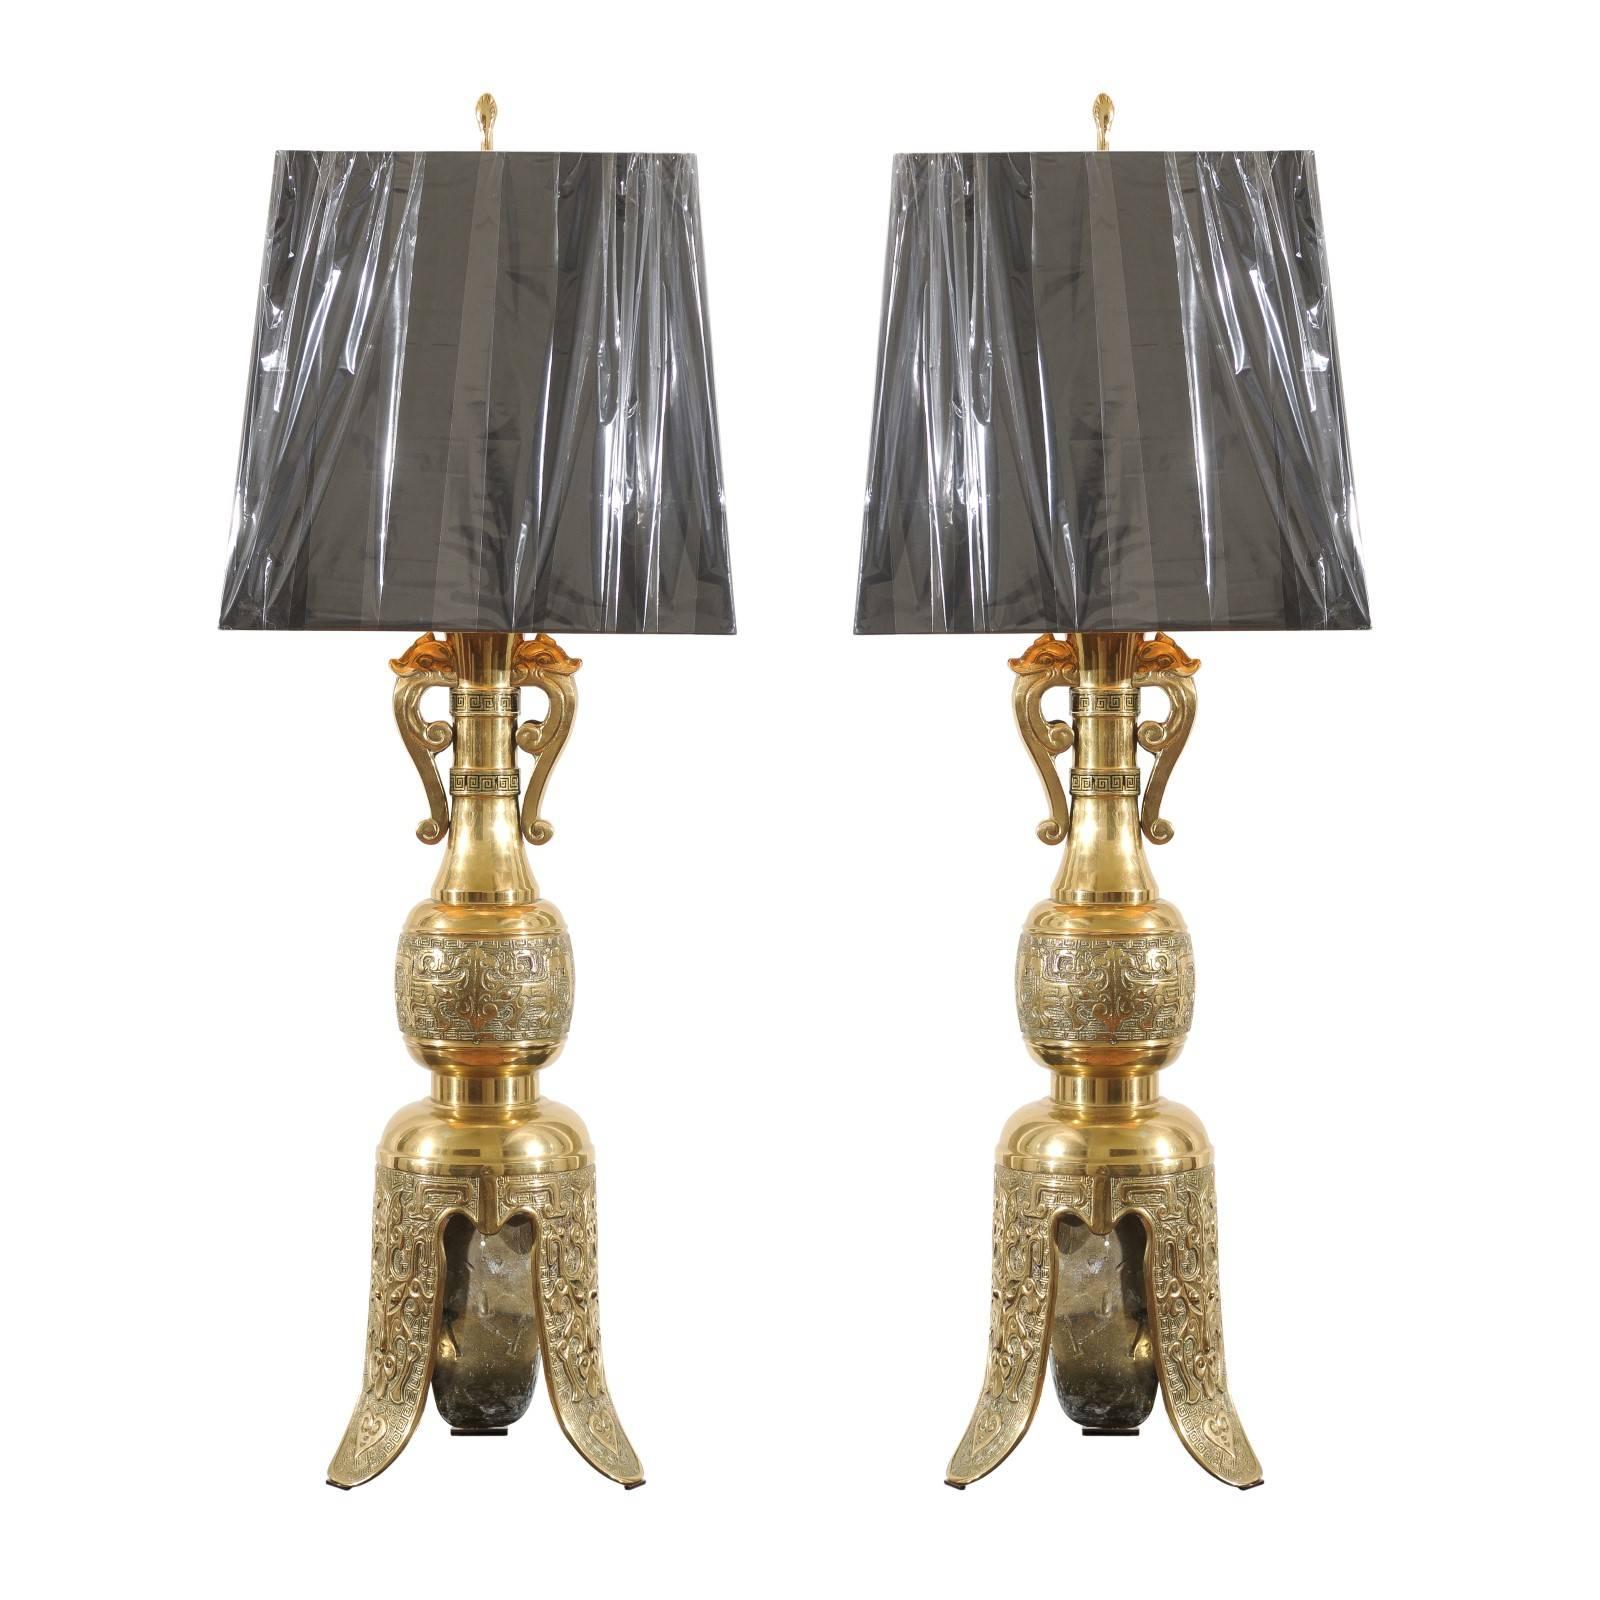 Majestic Pair of Mid-Century Brass Lamps with Spectacular Helmet Style Base